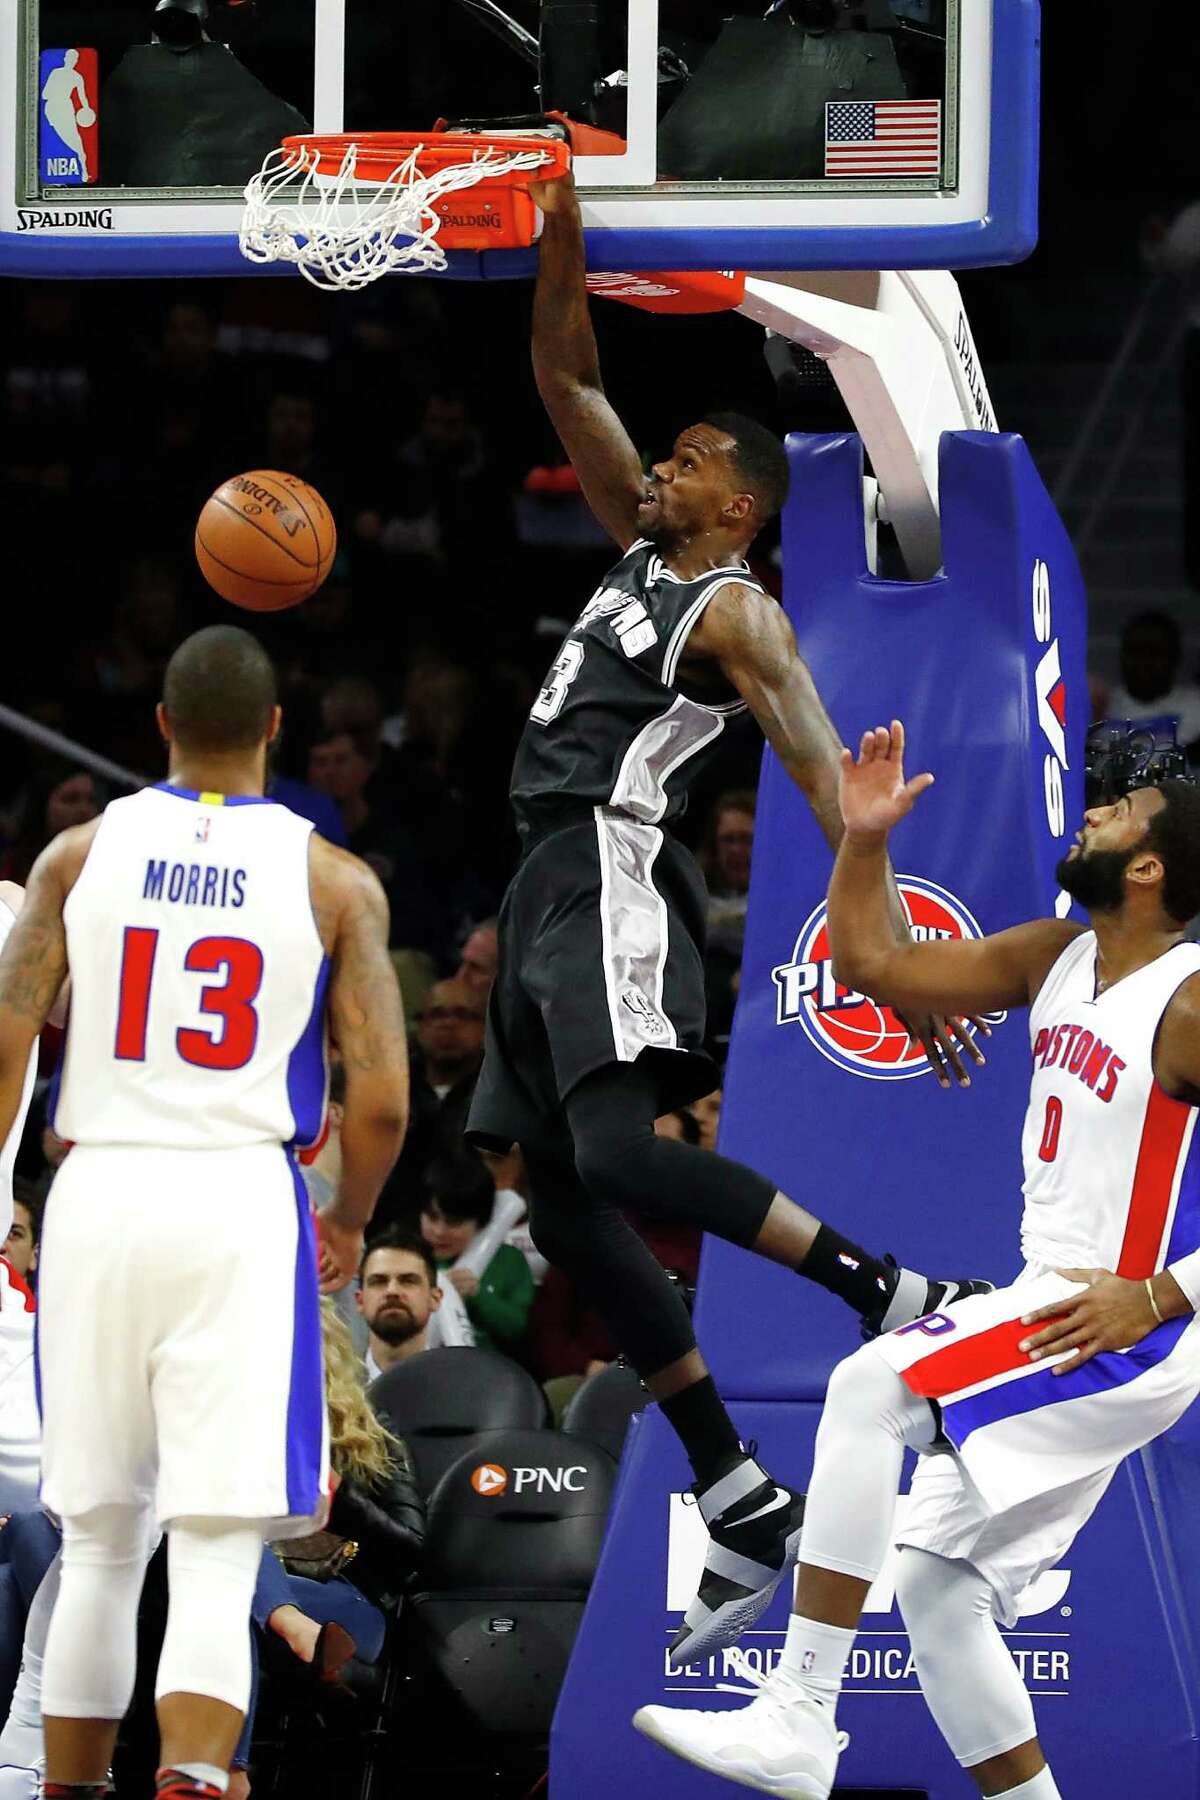 AUBURN HILLS, MI - FEBRUARY 10: Dewayne Dedmon #3 of the San Antonio Spurs gets a first half dunk between Marcus Morris #13 an Andre Drummond #0 of the Detroit Pistons at the Palace of Auburn Hills on February 10, 2017 in Auburn Hills, Michigan. San Antonio won the game 103-92. NOTE TO USER: User expressly acknowledges and agrees that, by downloading and or using this photograph, User is consenting to the terms and conditions of the Getty Images License Agreement.